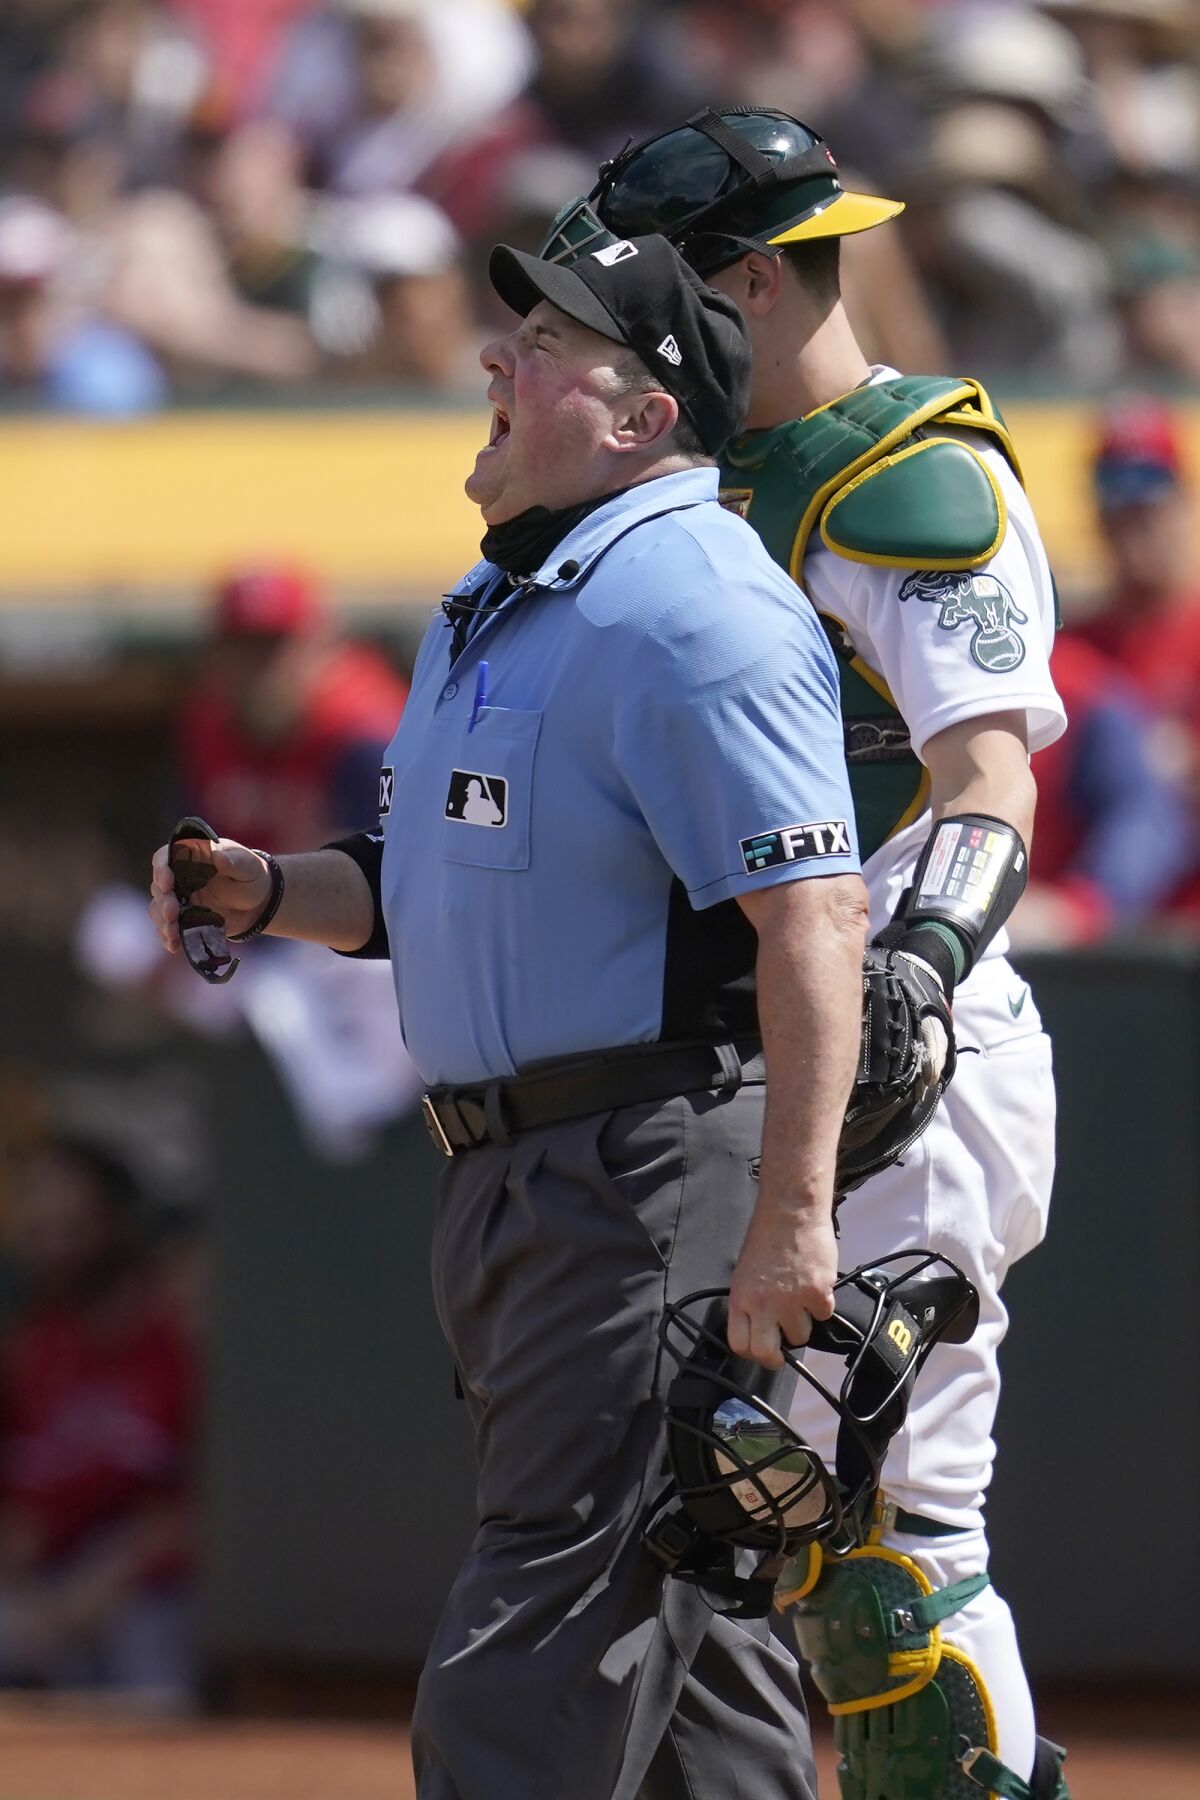 Home plate umpire Marty Foster, left, reacts after being hit by a ball in front of Oakland Athletics catcher Sean Murphy, right, during the seventh inning of a baseball game against the Los Angeles Angels in Oakland, Calif., Sunday, May 15, 2022. (AP Photo/Jeff Chiu)